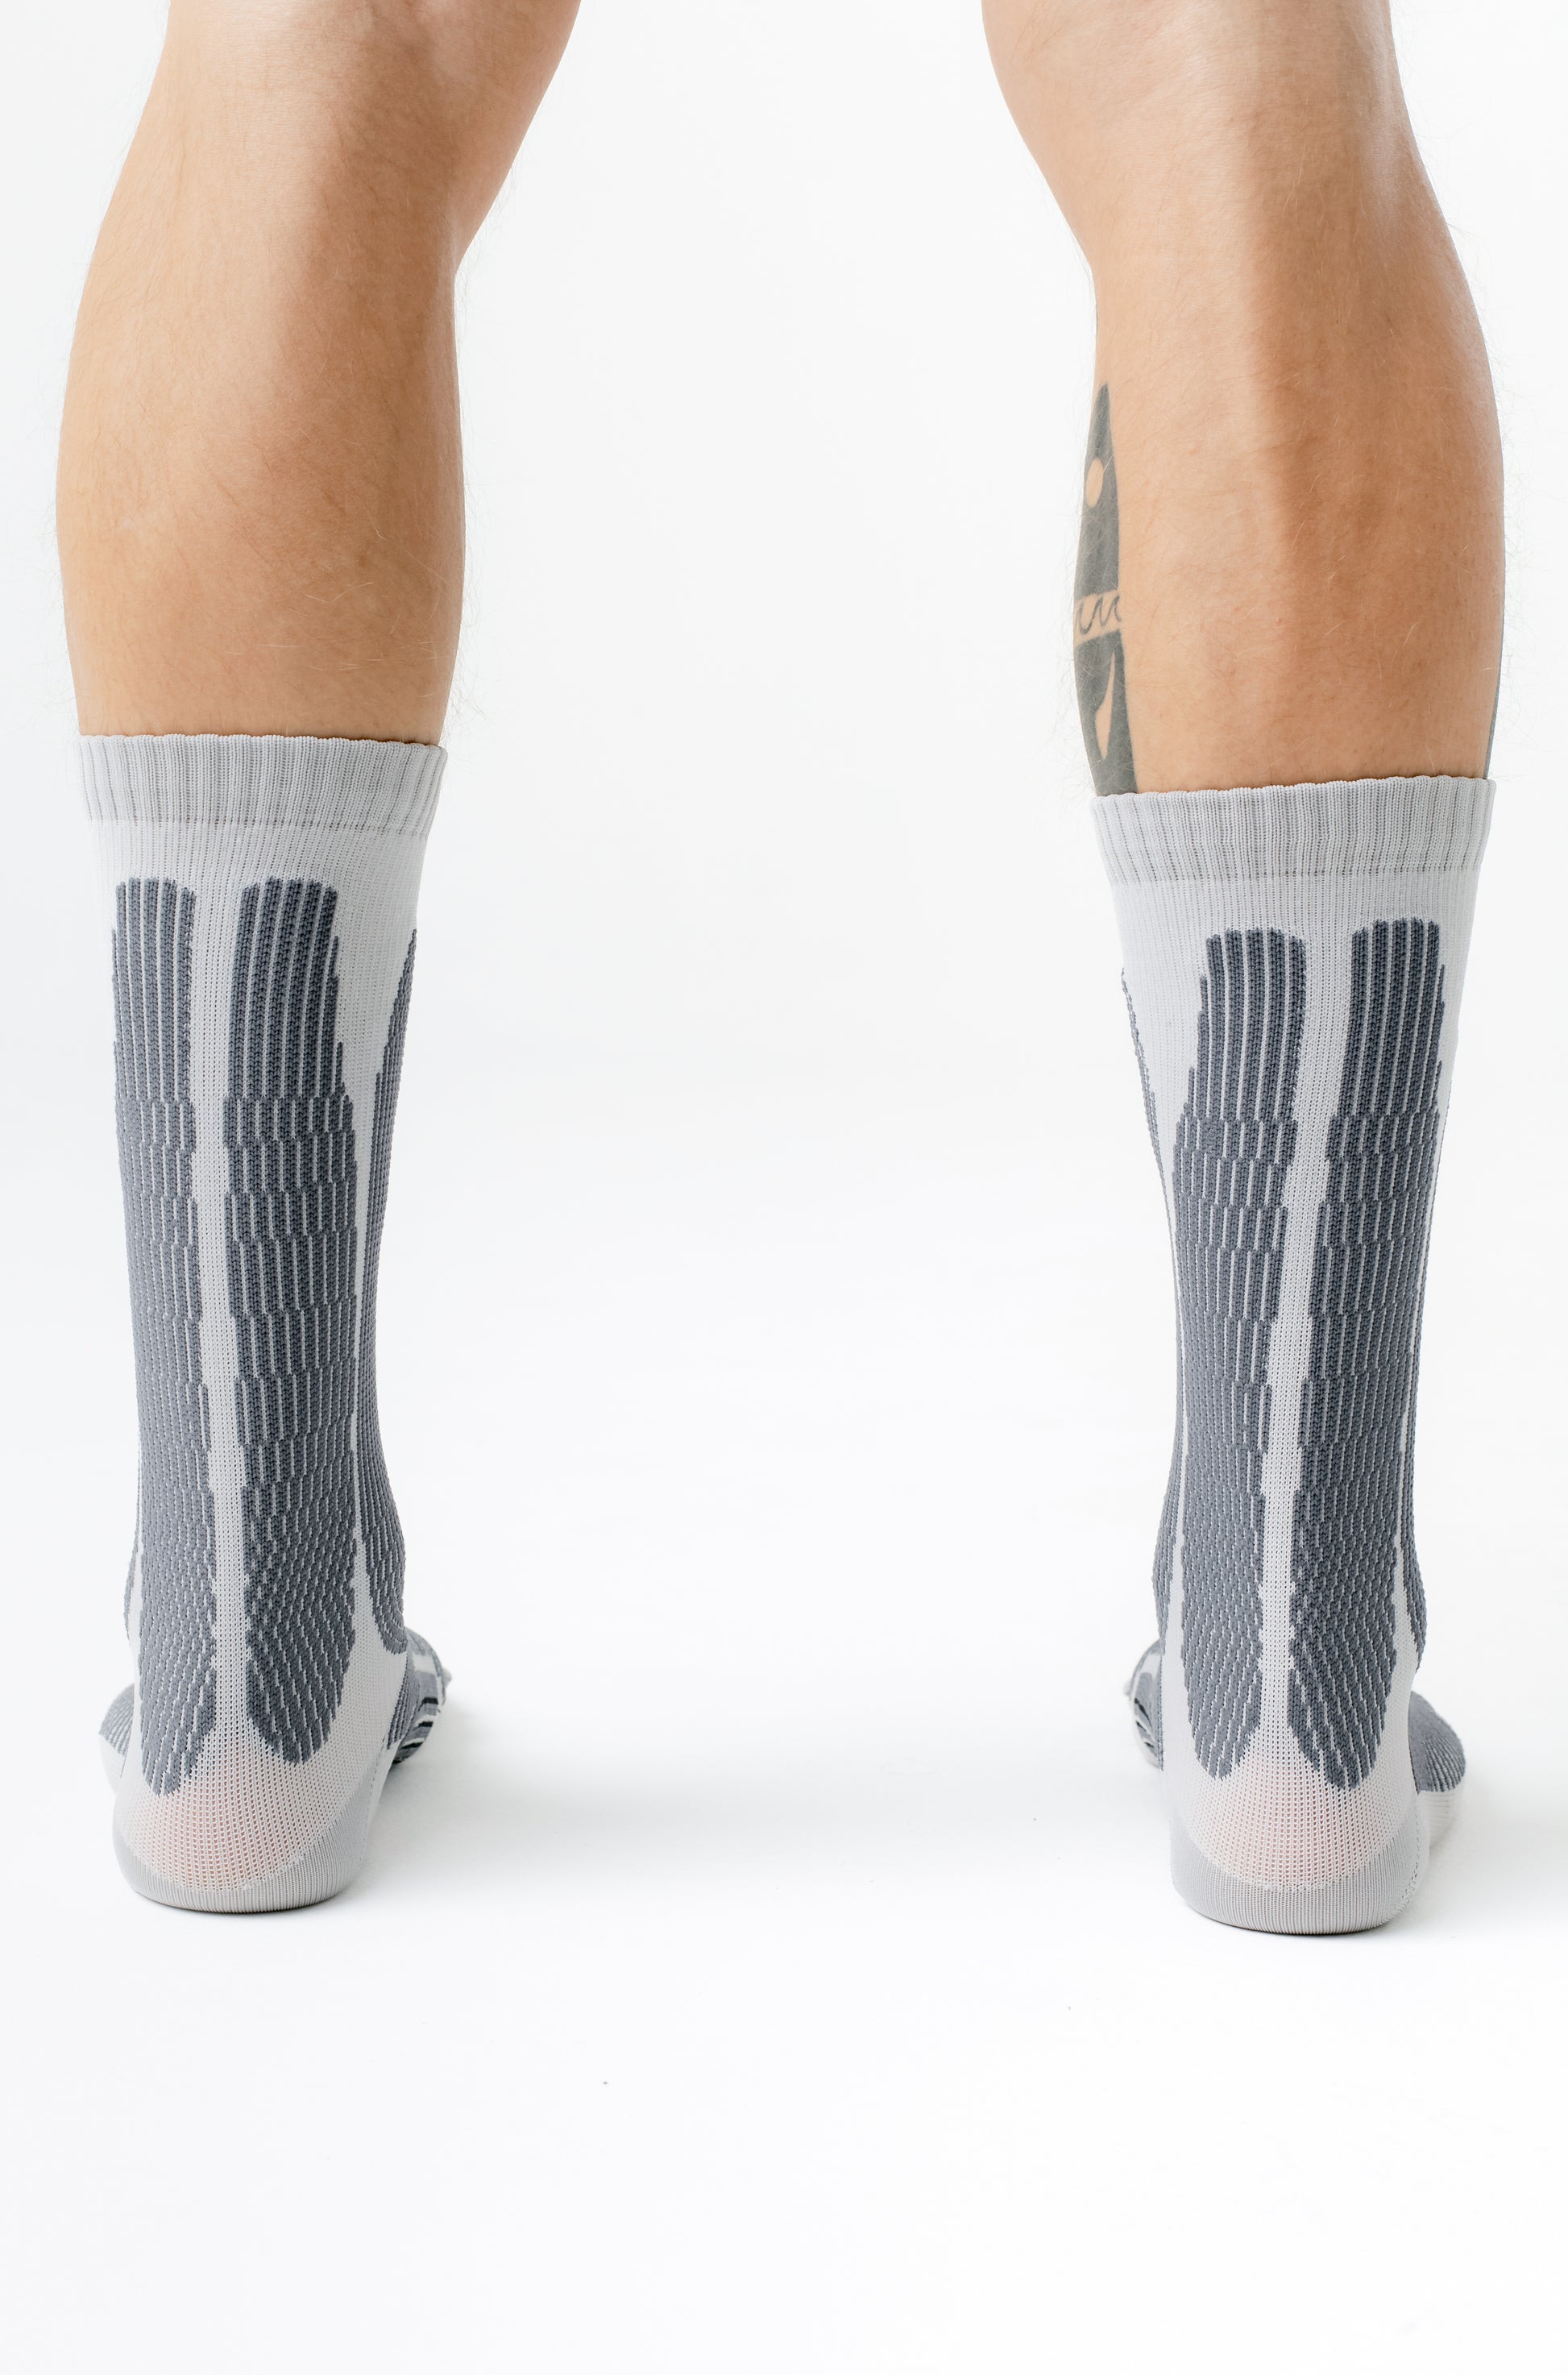 PACE - DT2 Forms Compression Socks Mid "Aluminium" - THE GAME